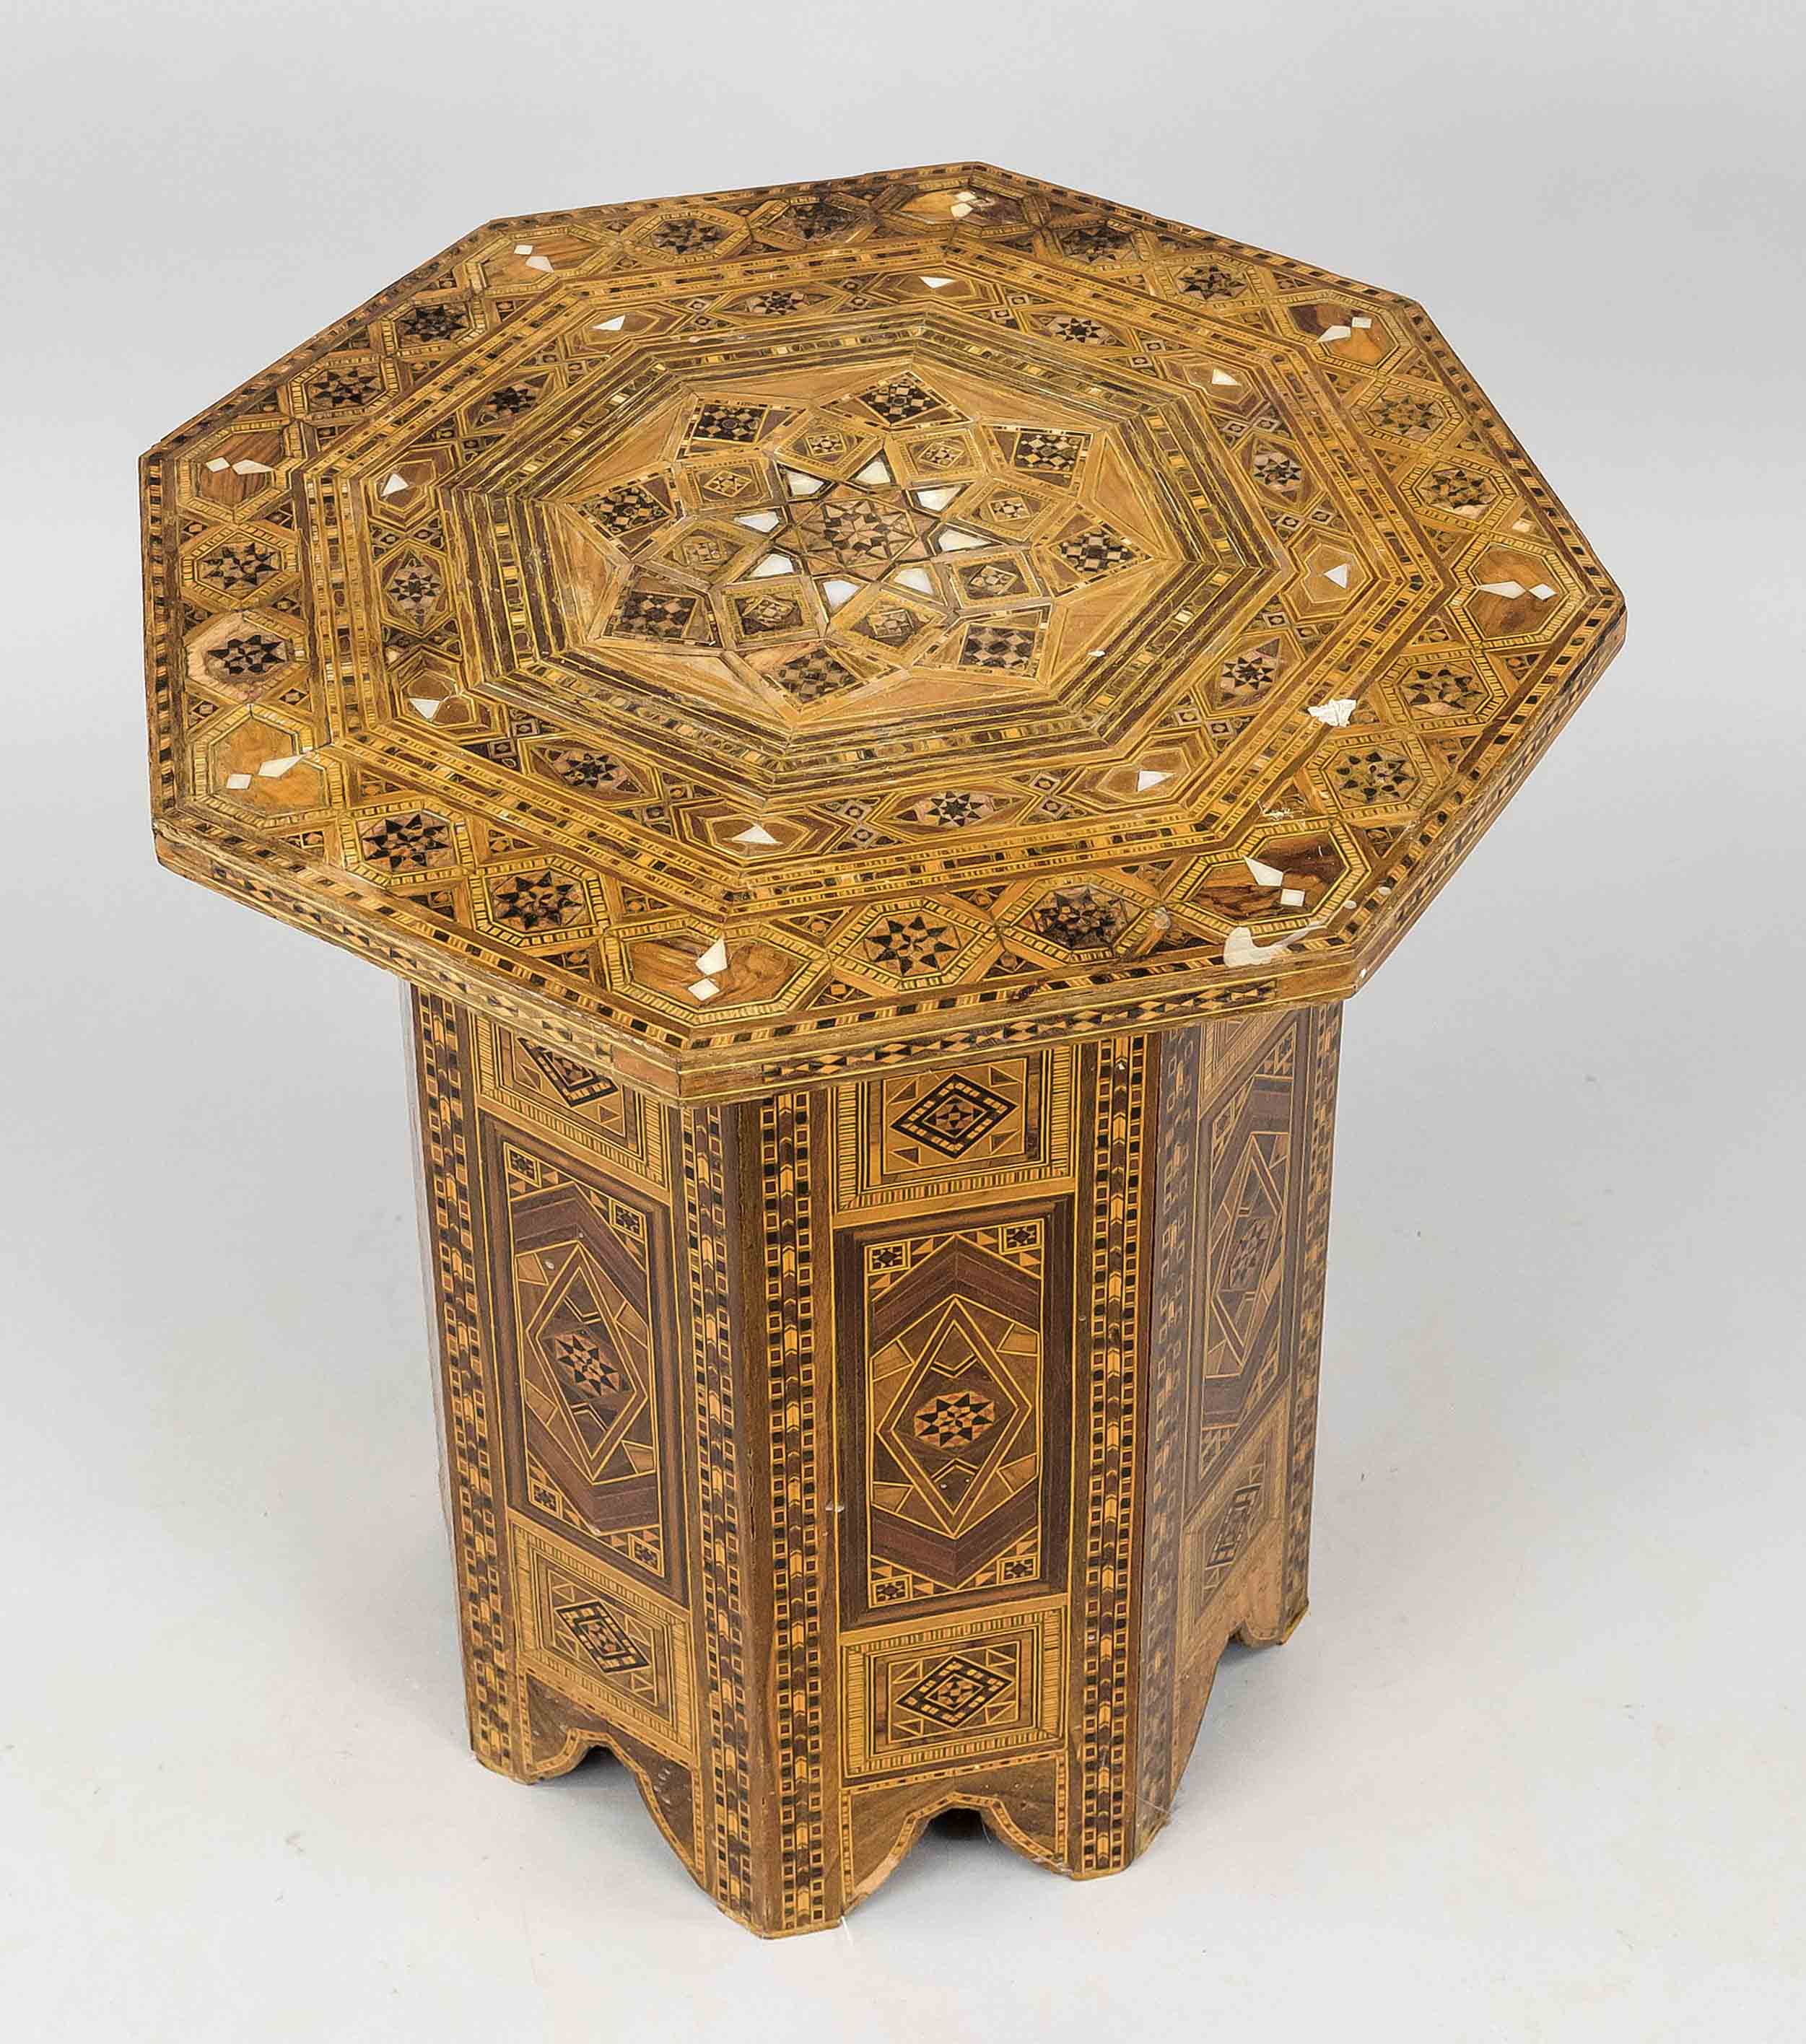 Octagonal inlaid table, oriental (probably Egyptian) 1st half 20th century, various woods and